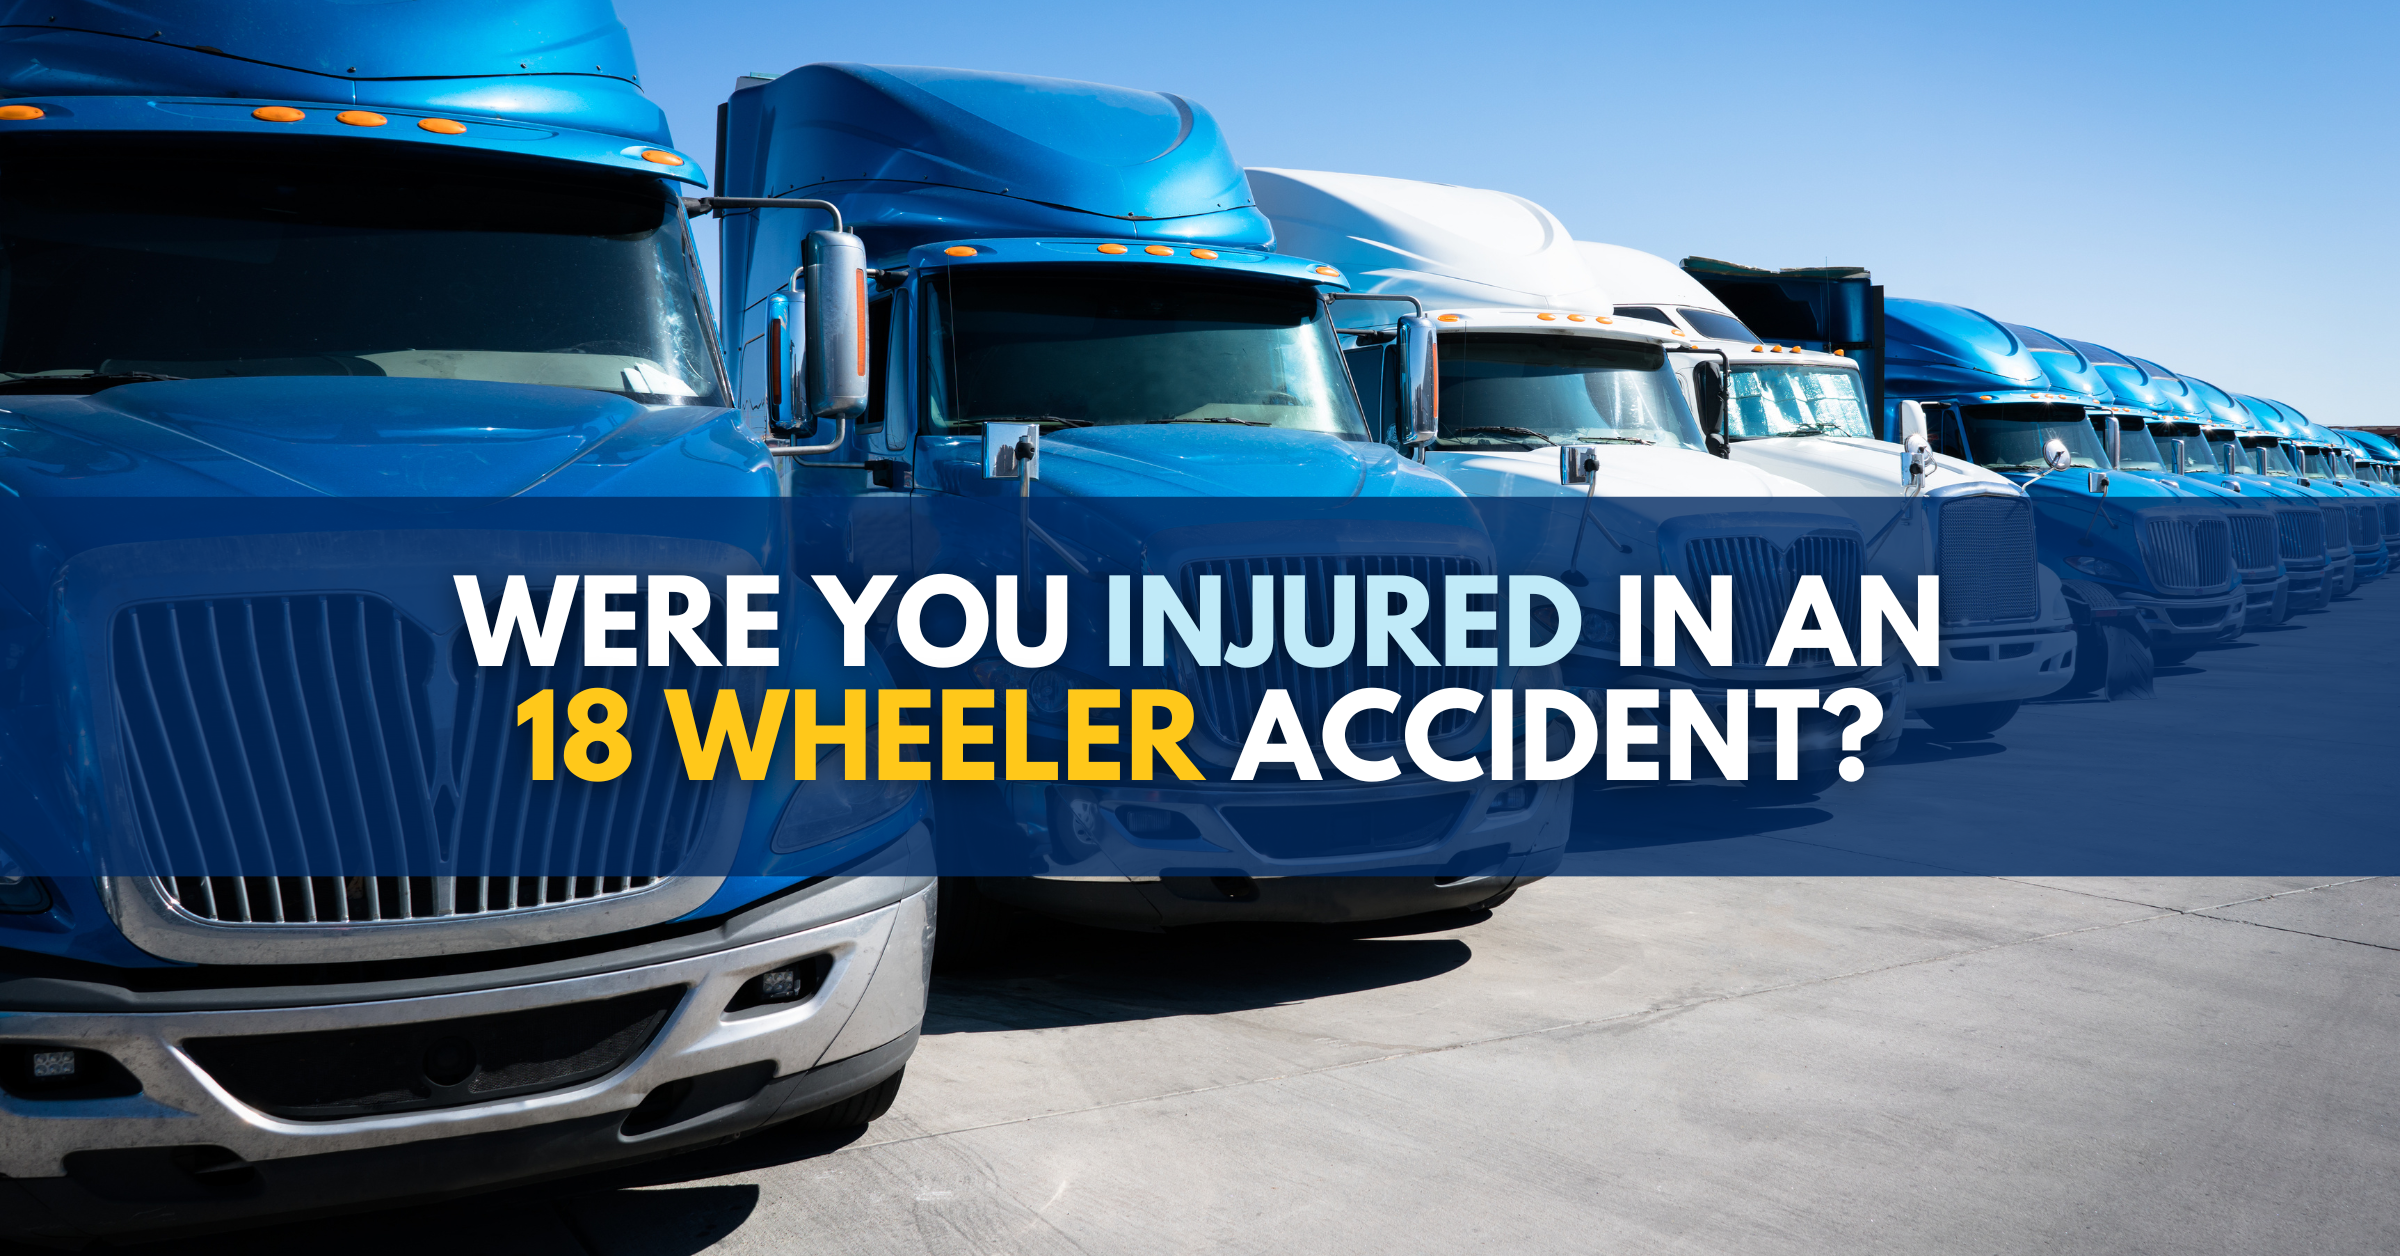 Michigan 18 Wheeler Accident Lawyer: No Fees Unless We Win!